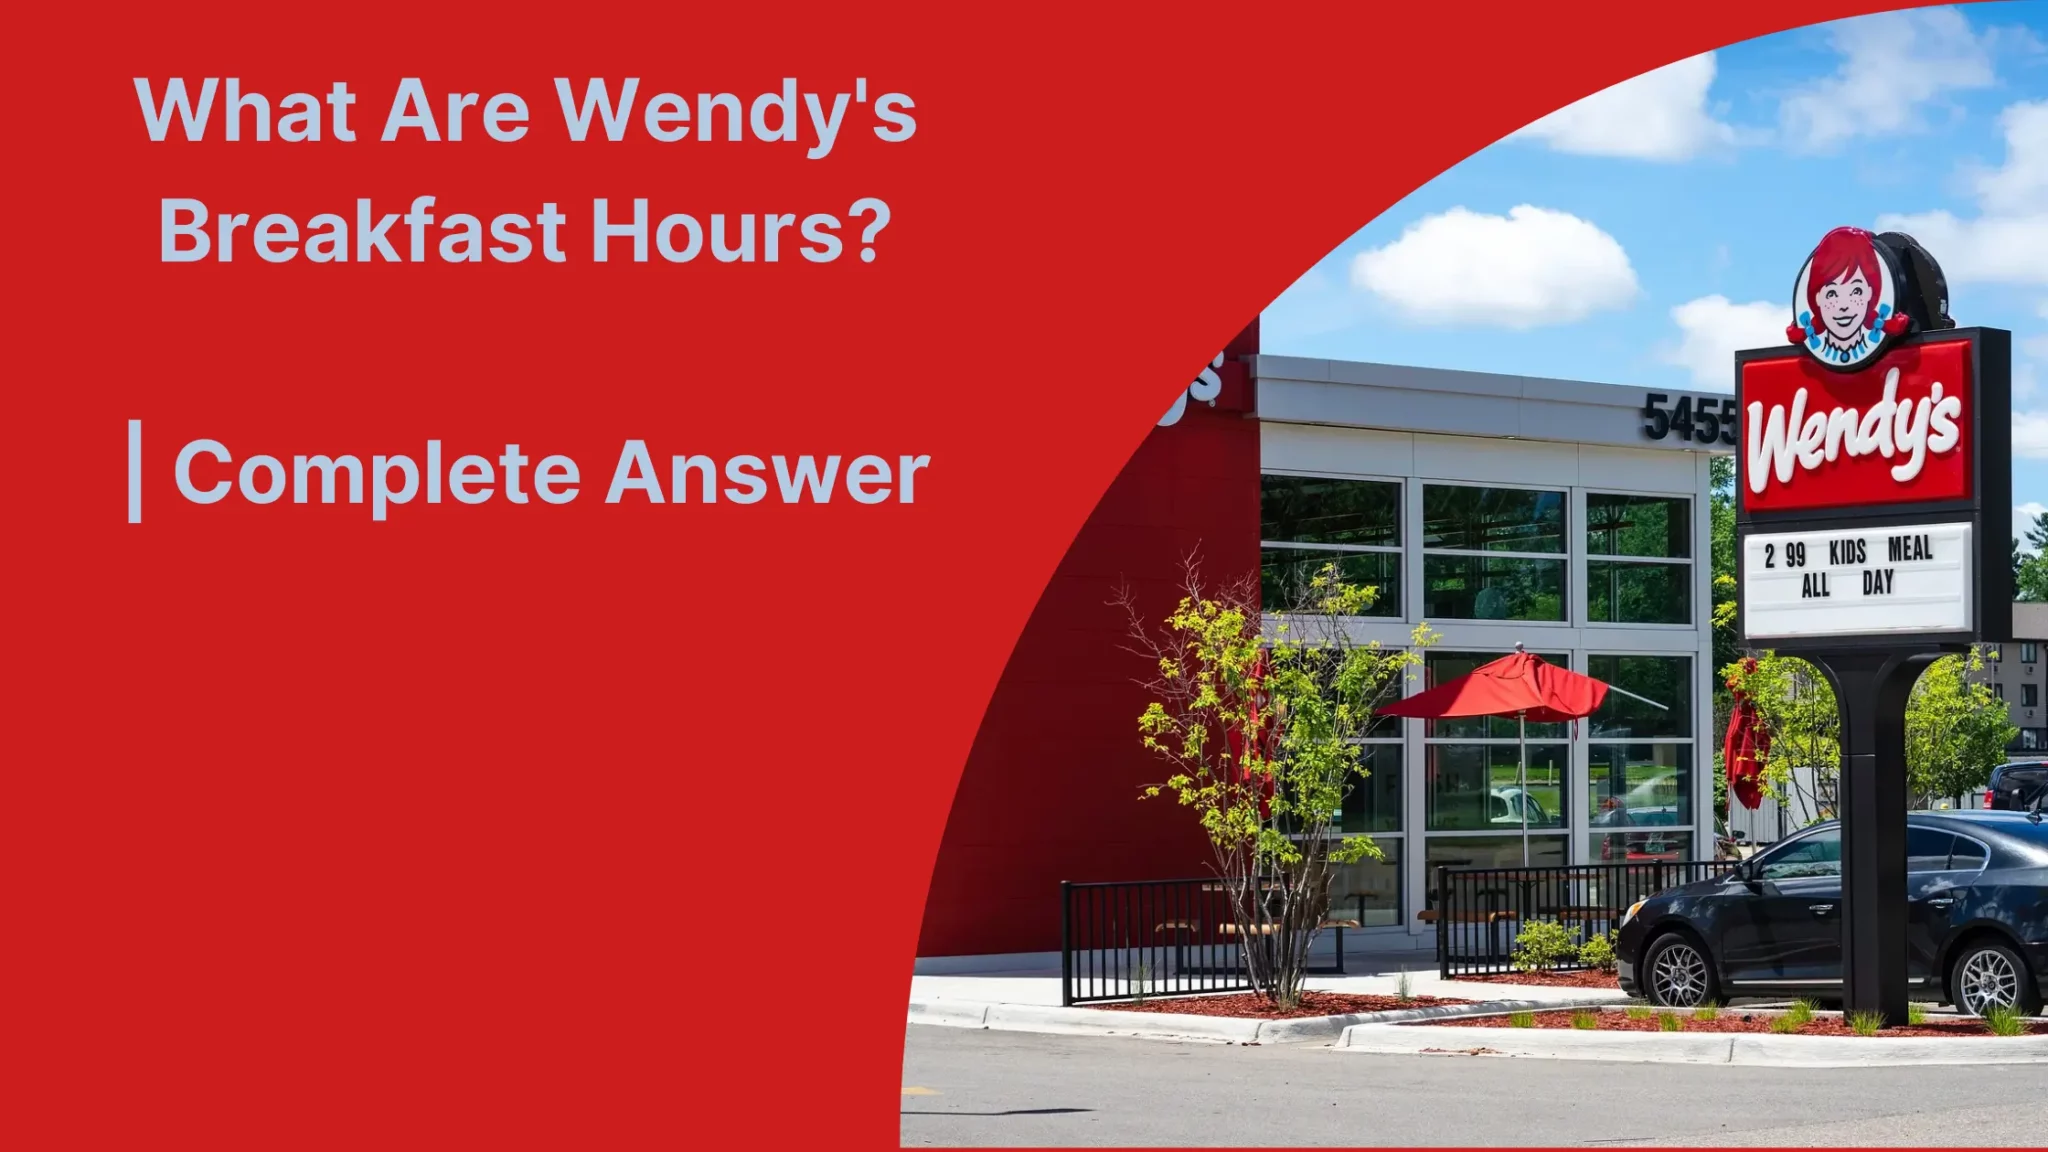 What Are Wendy's Breakfast Hours?